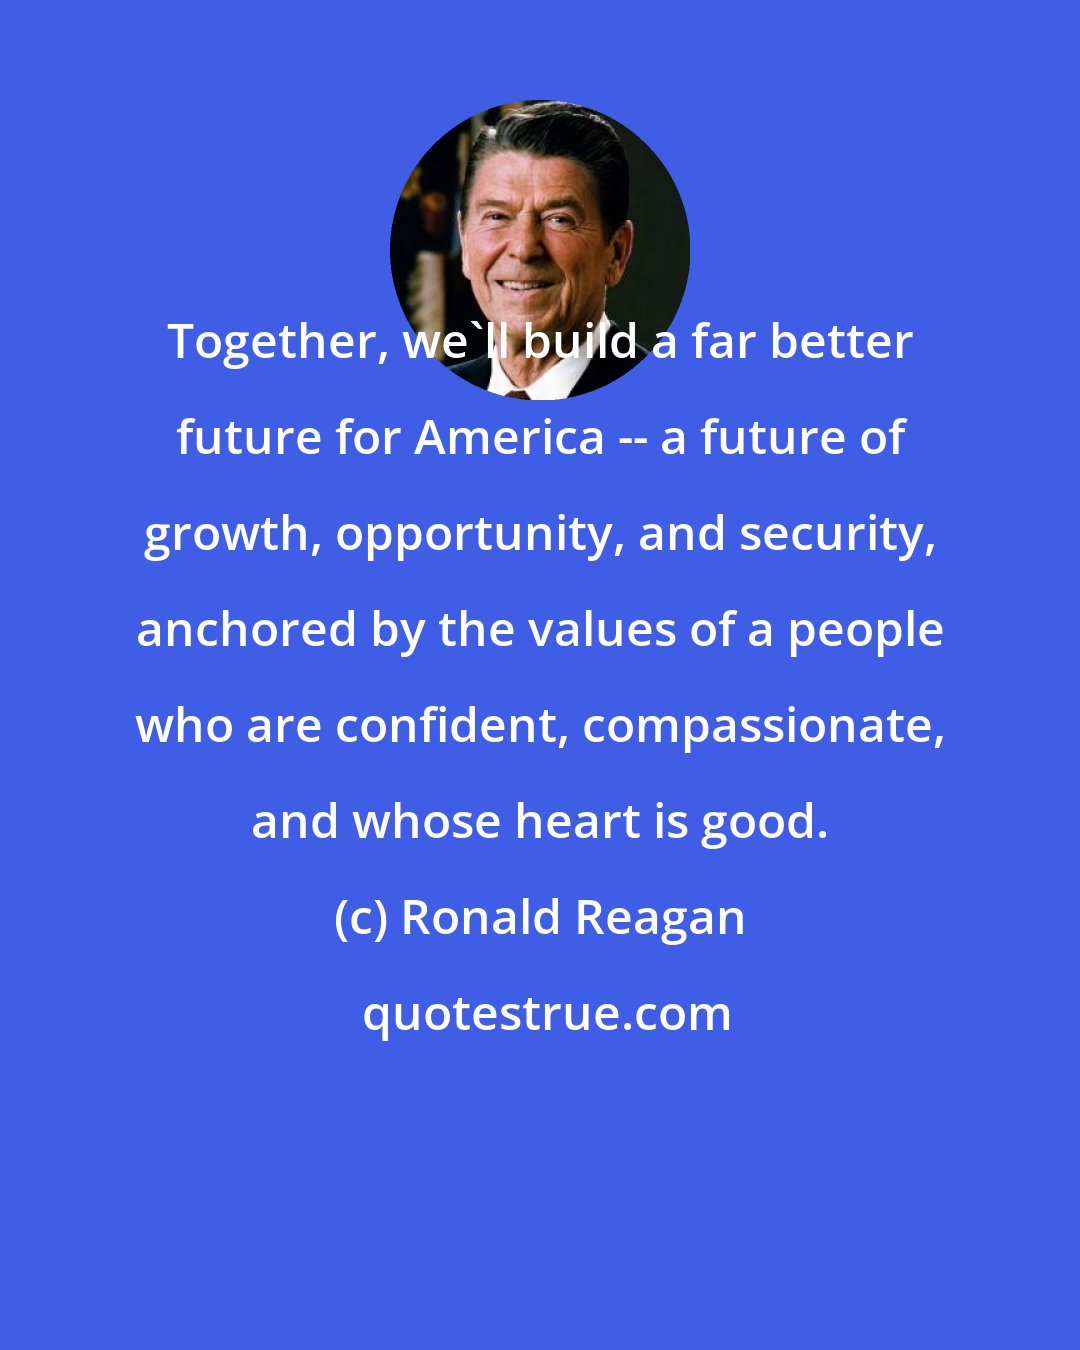 Ronald Reagan: Together, we'll build a far better future for America -- a future of growth, opportunity, and security, anchored by the values of a people who are confident, compassionate, and whose heart is good.